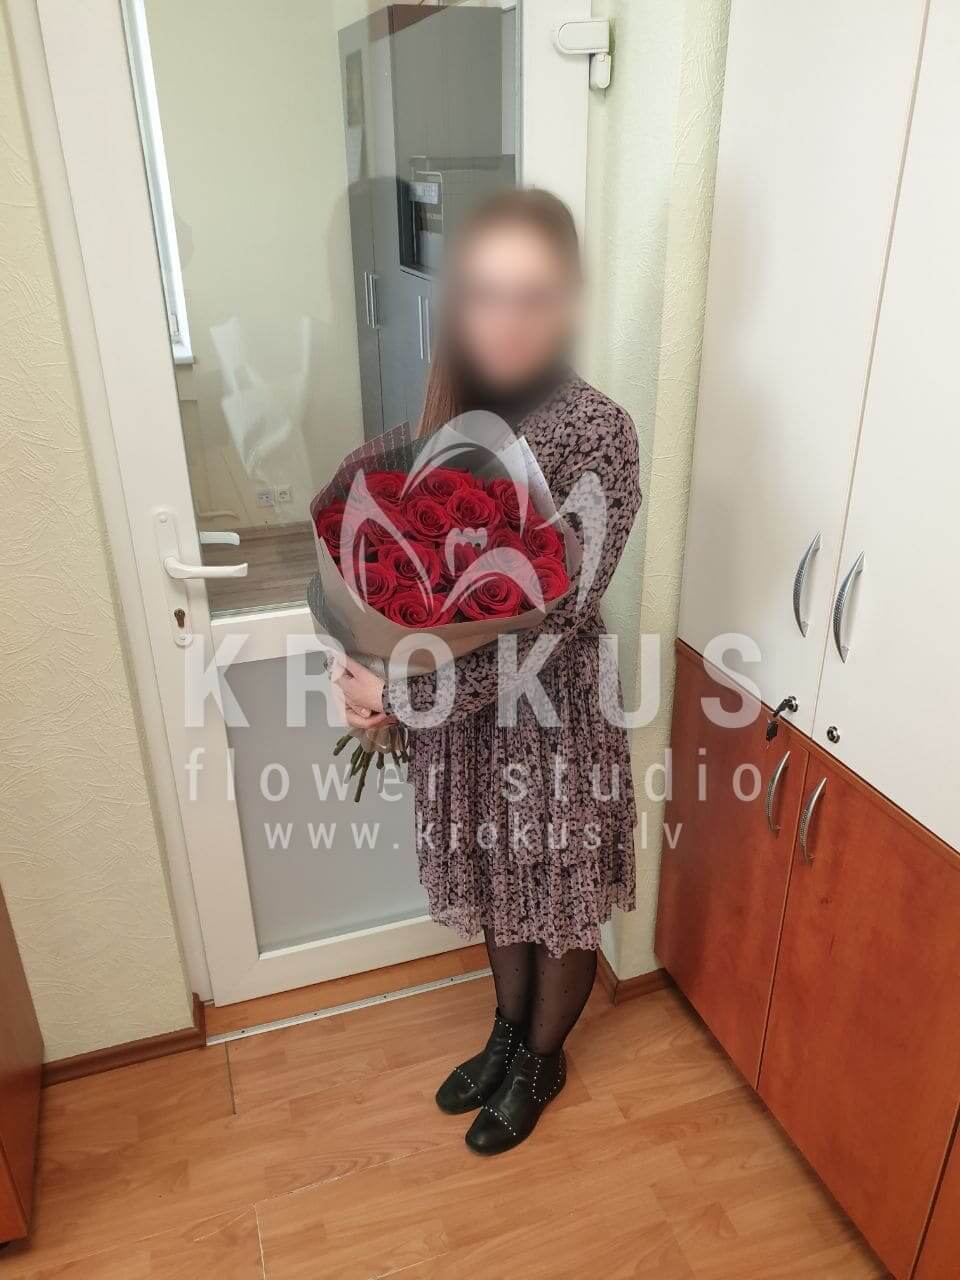 Deliver flowers to Ulbroka (red roses)